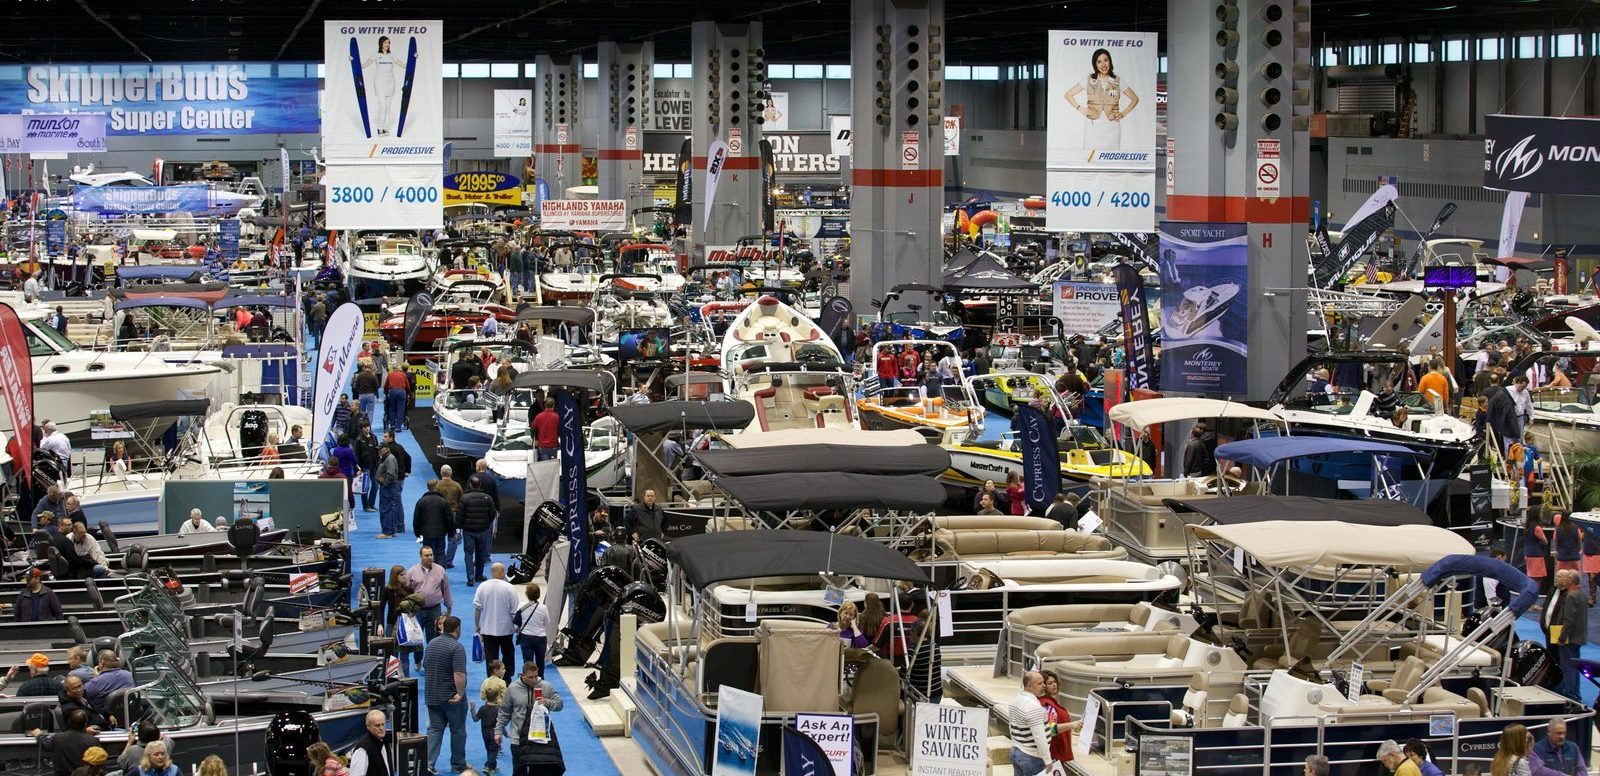 Discover Boating Chicago Boat Show makes return after hiatus